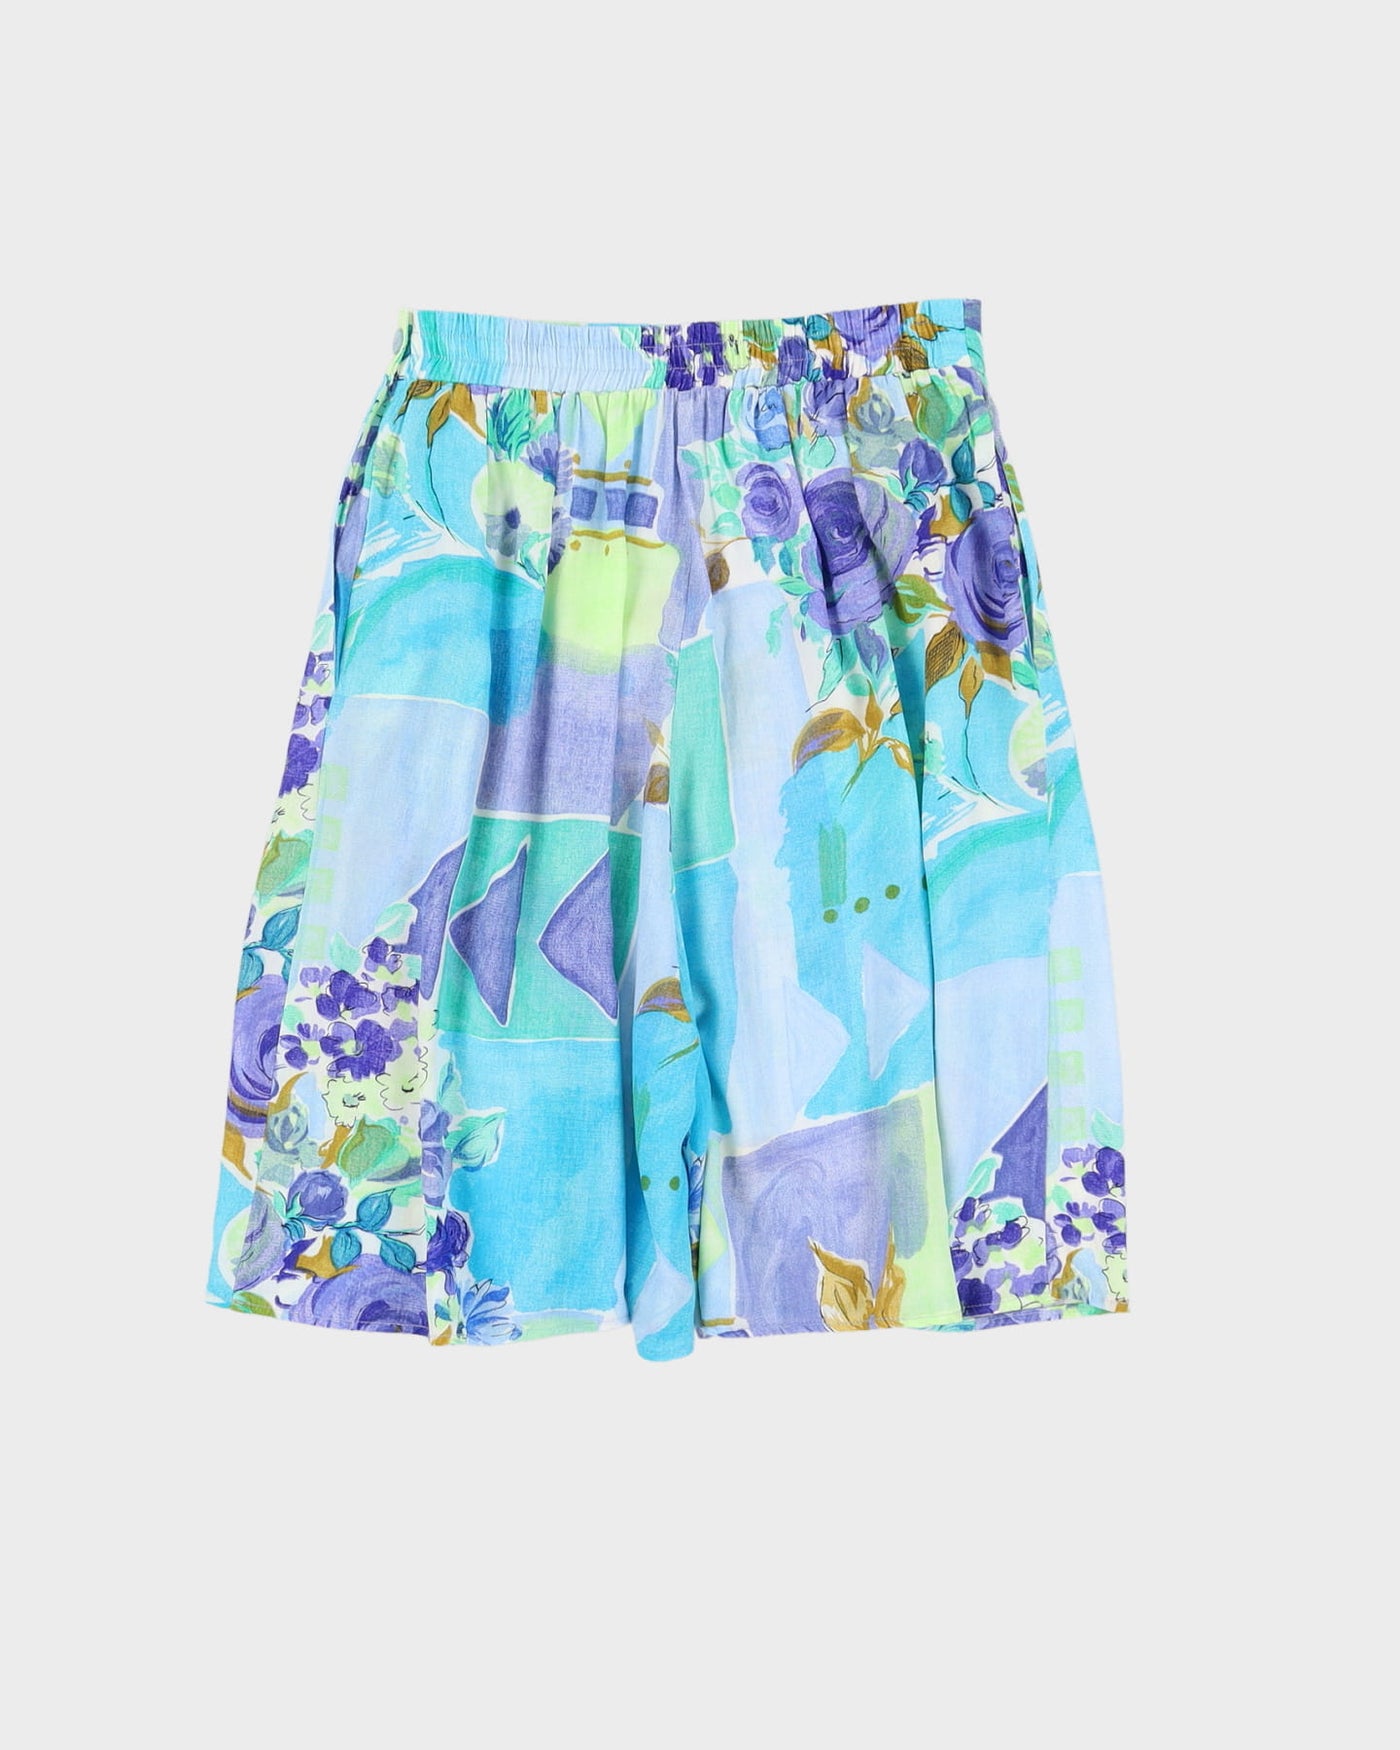 Blue Patterned High Waisted Shorts - S